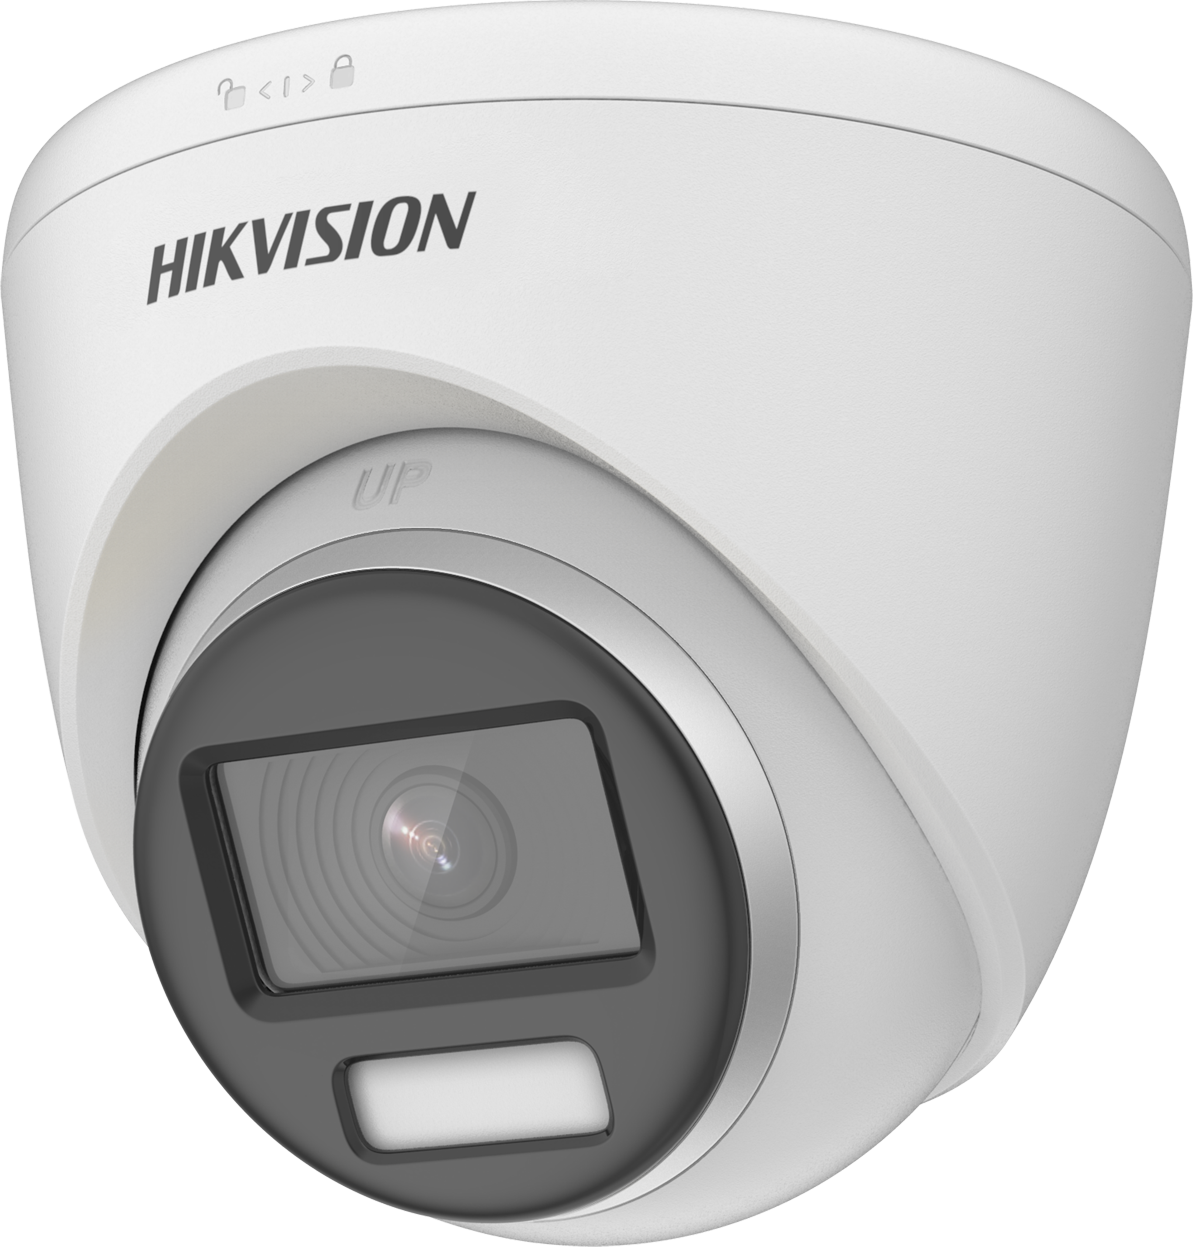 Hikvision DS-2CE72KF0T-FS-2.8MM - 3K fixed lens ColorVu turret camera with audio